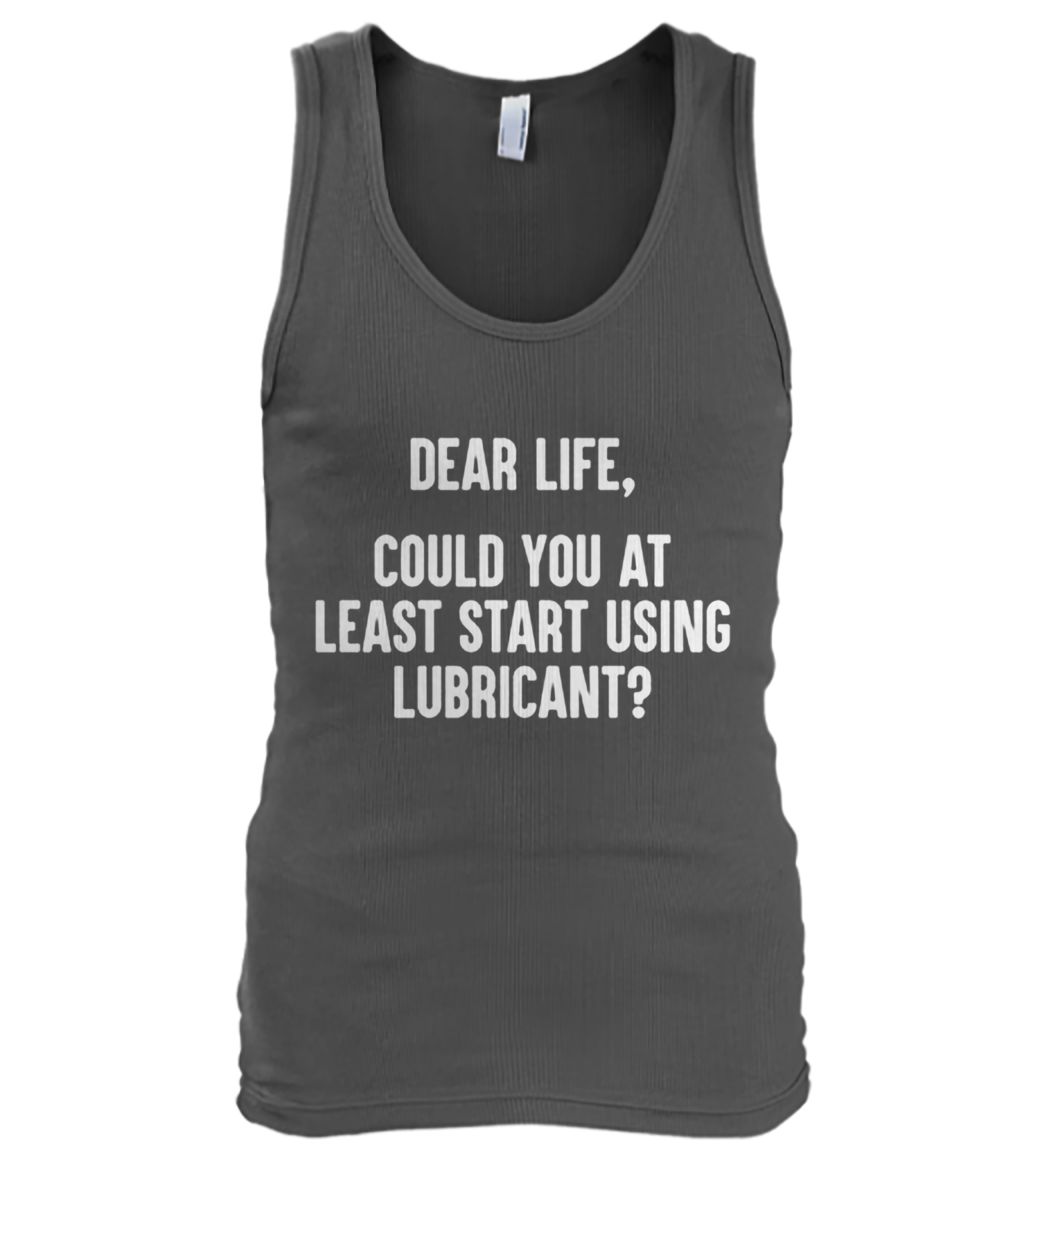 Dear life could at least you start using lubricant men's tank top